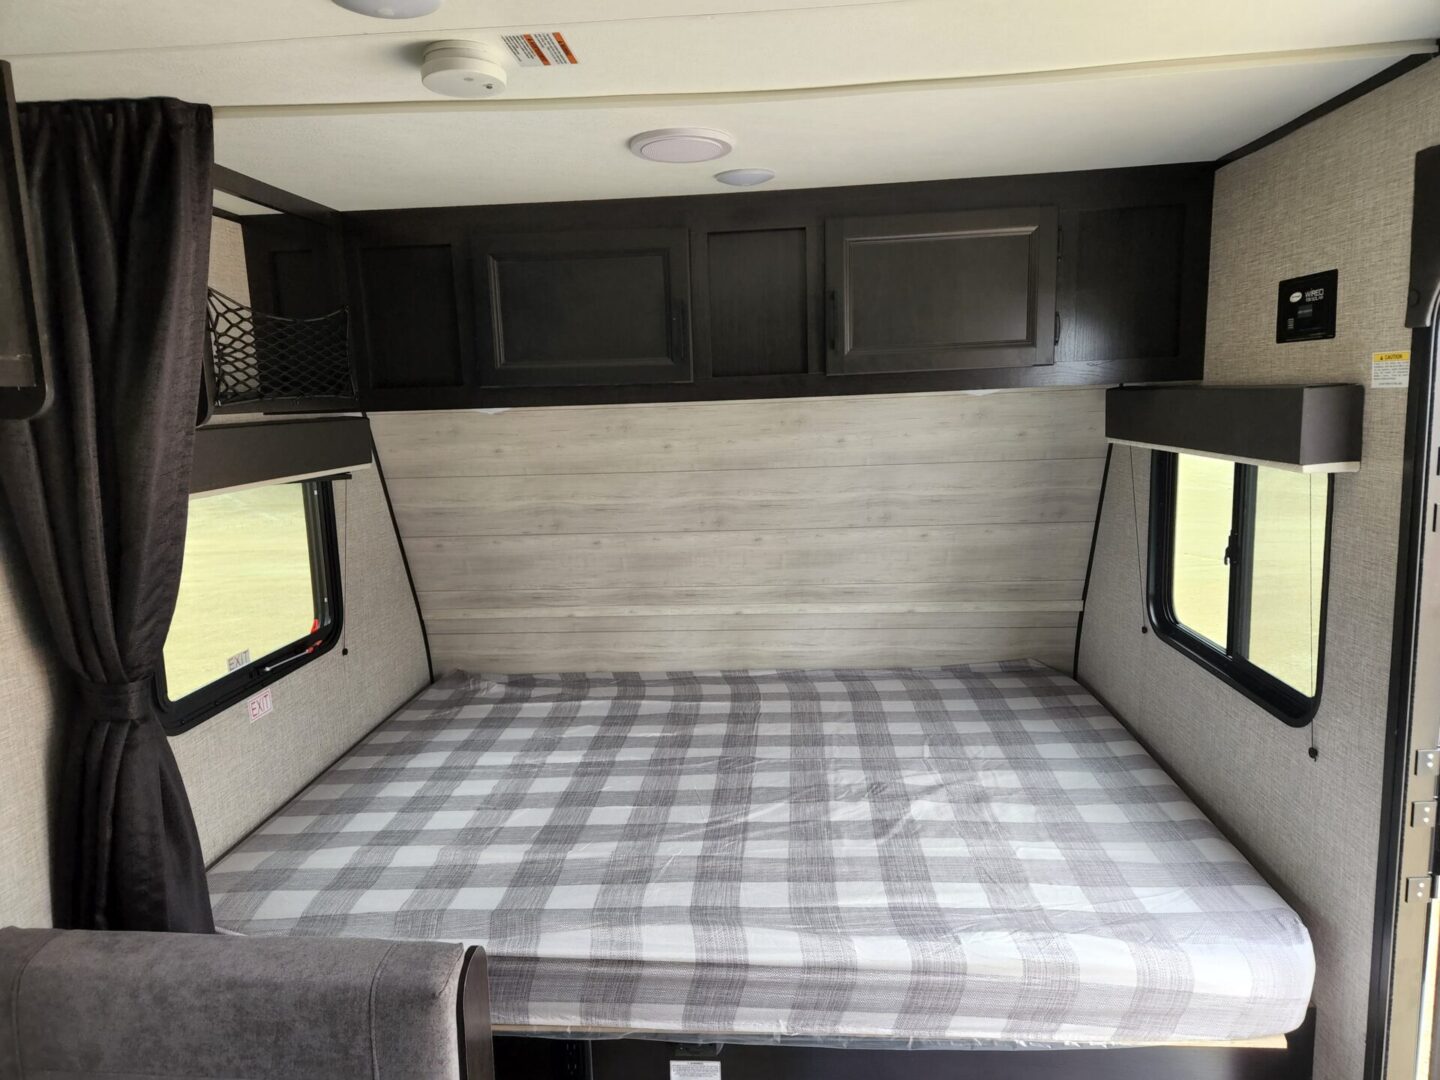 A bed in the back of an rv.